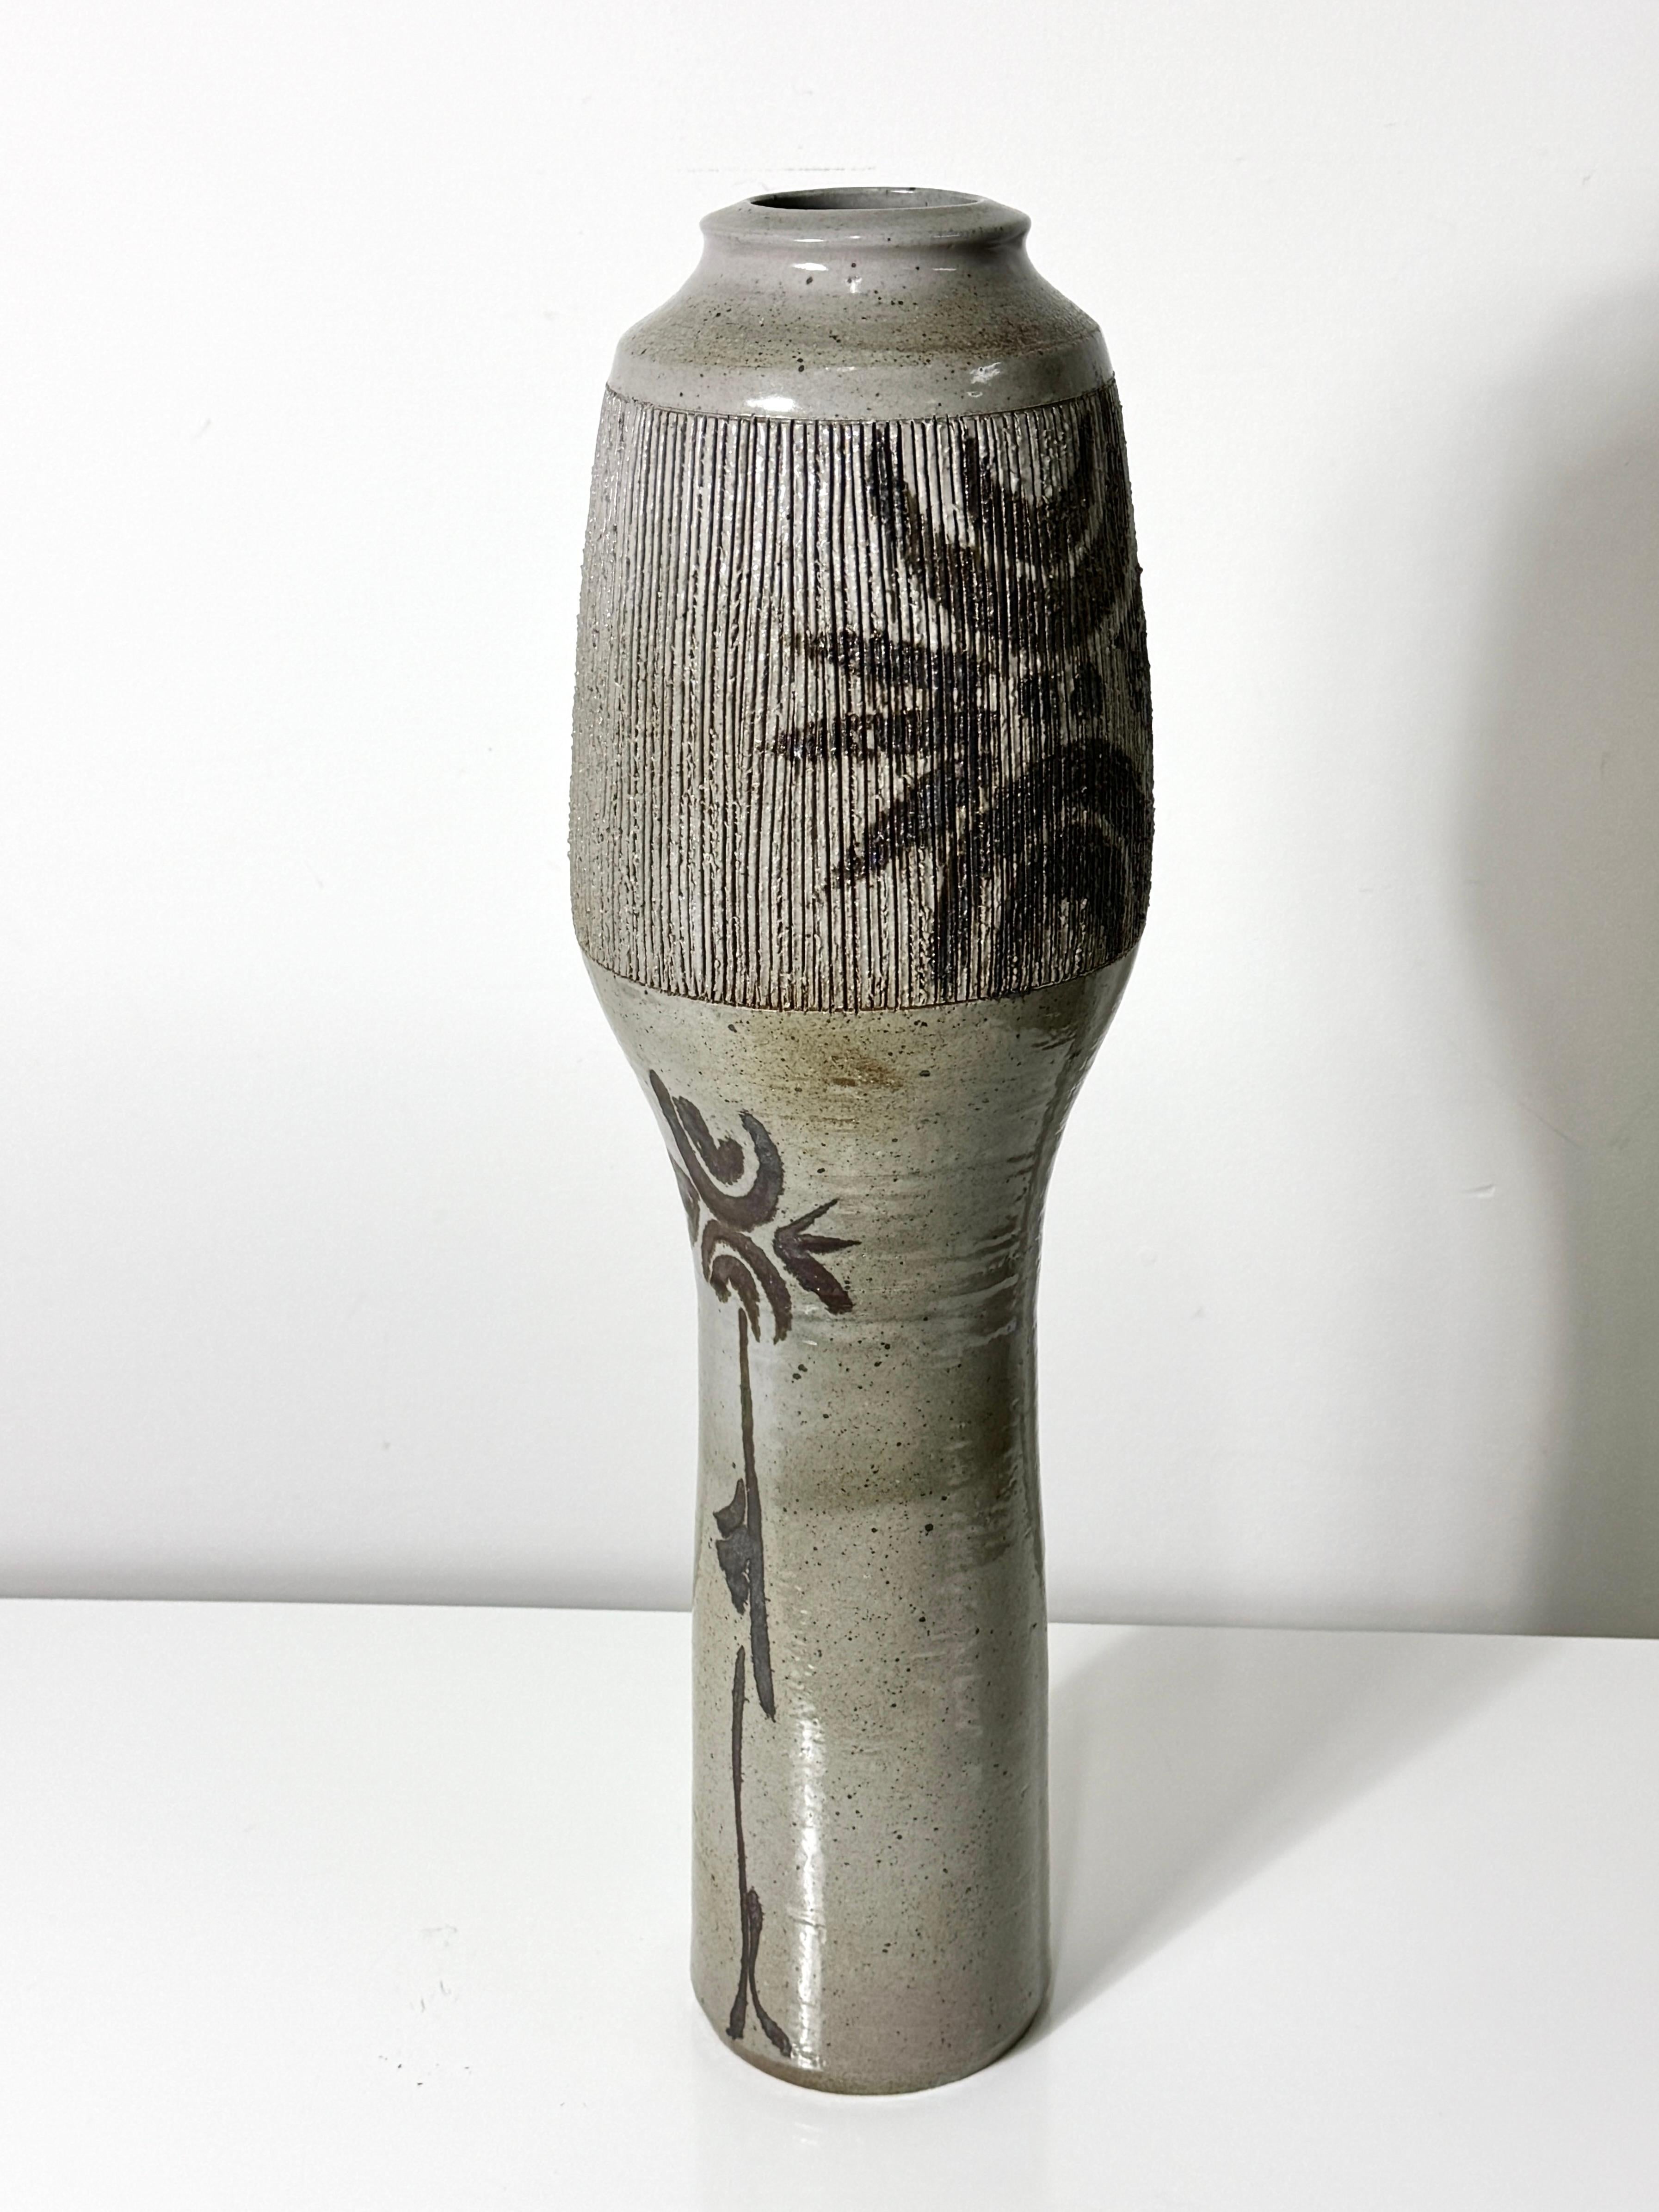 Tall ceramic floor vase by Sheniar Abdullah Salman circa 1970s
Organic form in gray glazed stoneware with incised upper detailing and applied modernist decoration.

27 inches in height
7.5 inch diameter at widest

With an MFA in fine arts from